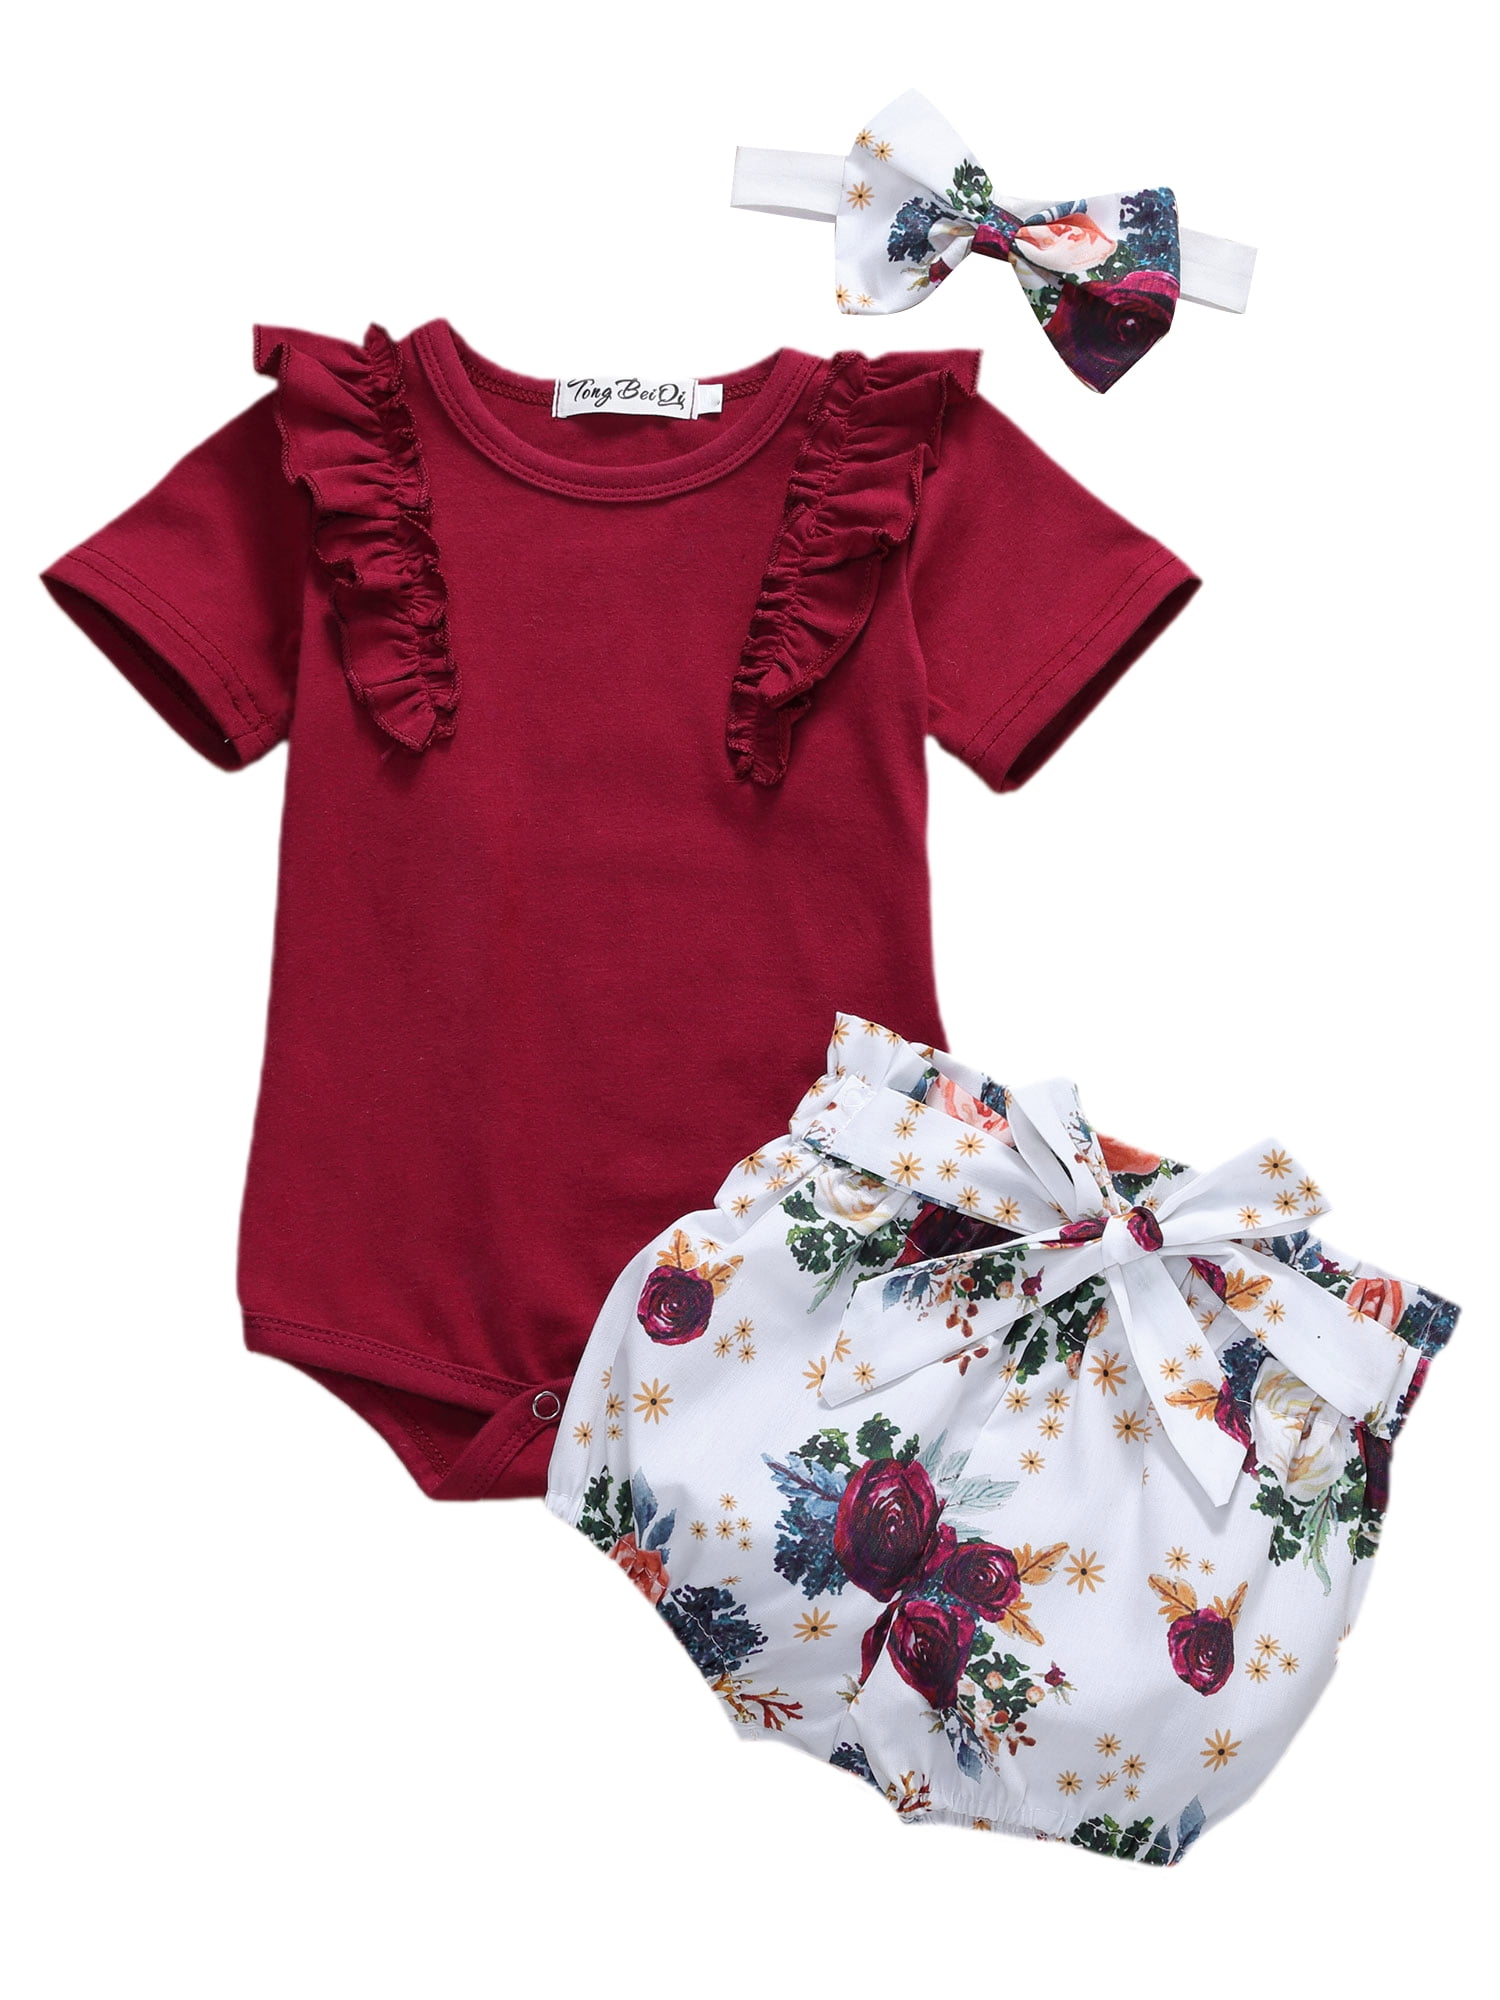 Infant Baby Girl Floral Shorts Clothes Baby Sister Organic Cotton Romper Bodysuit Ruffles Shorts 3PCS Outfit Set Sundress